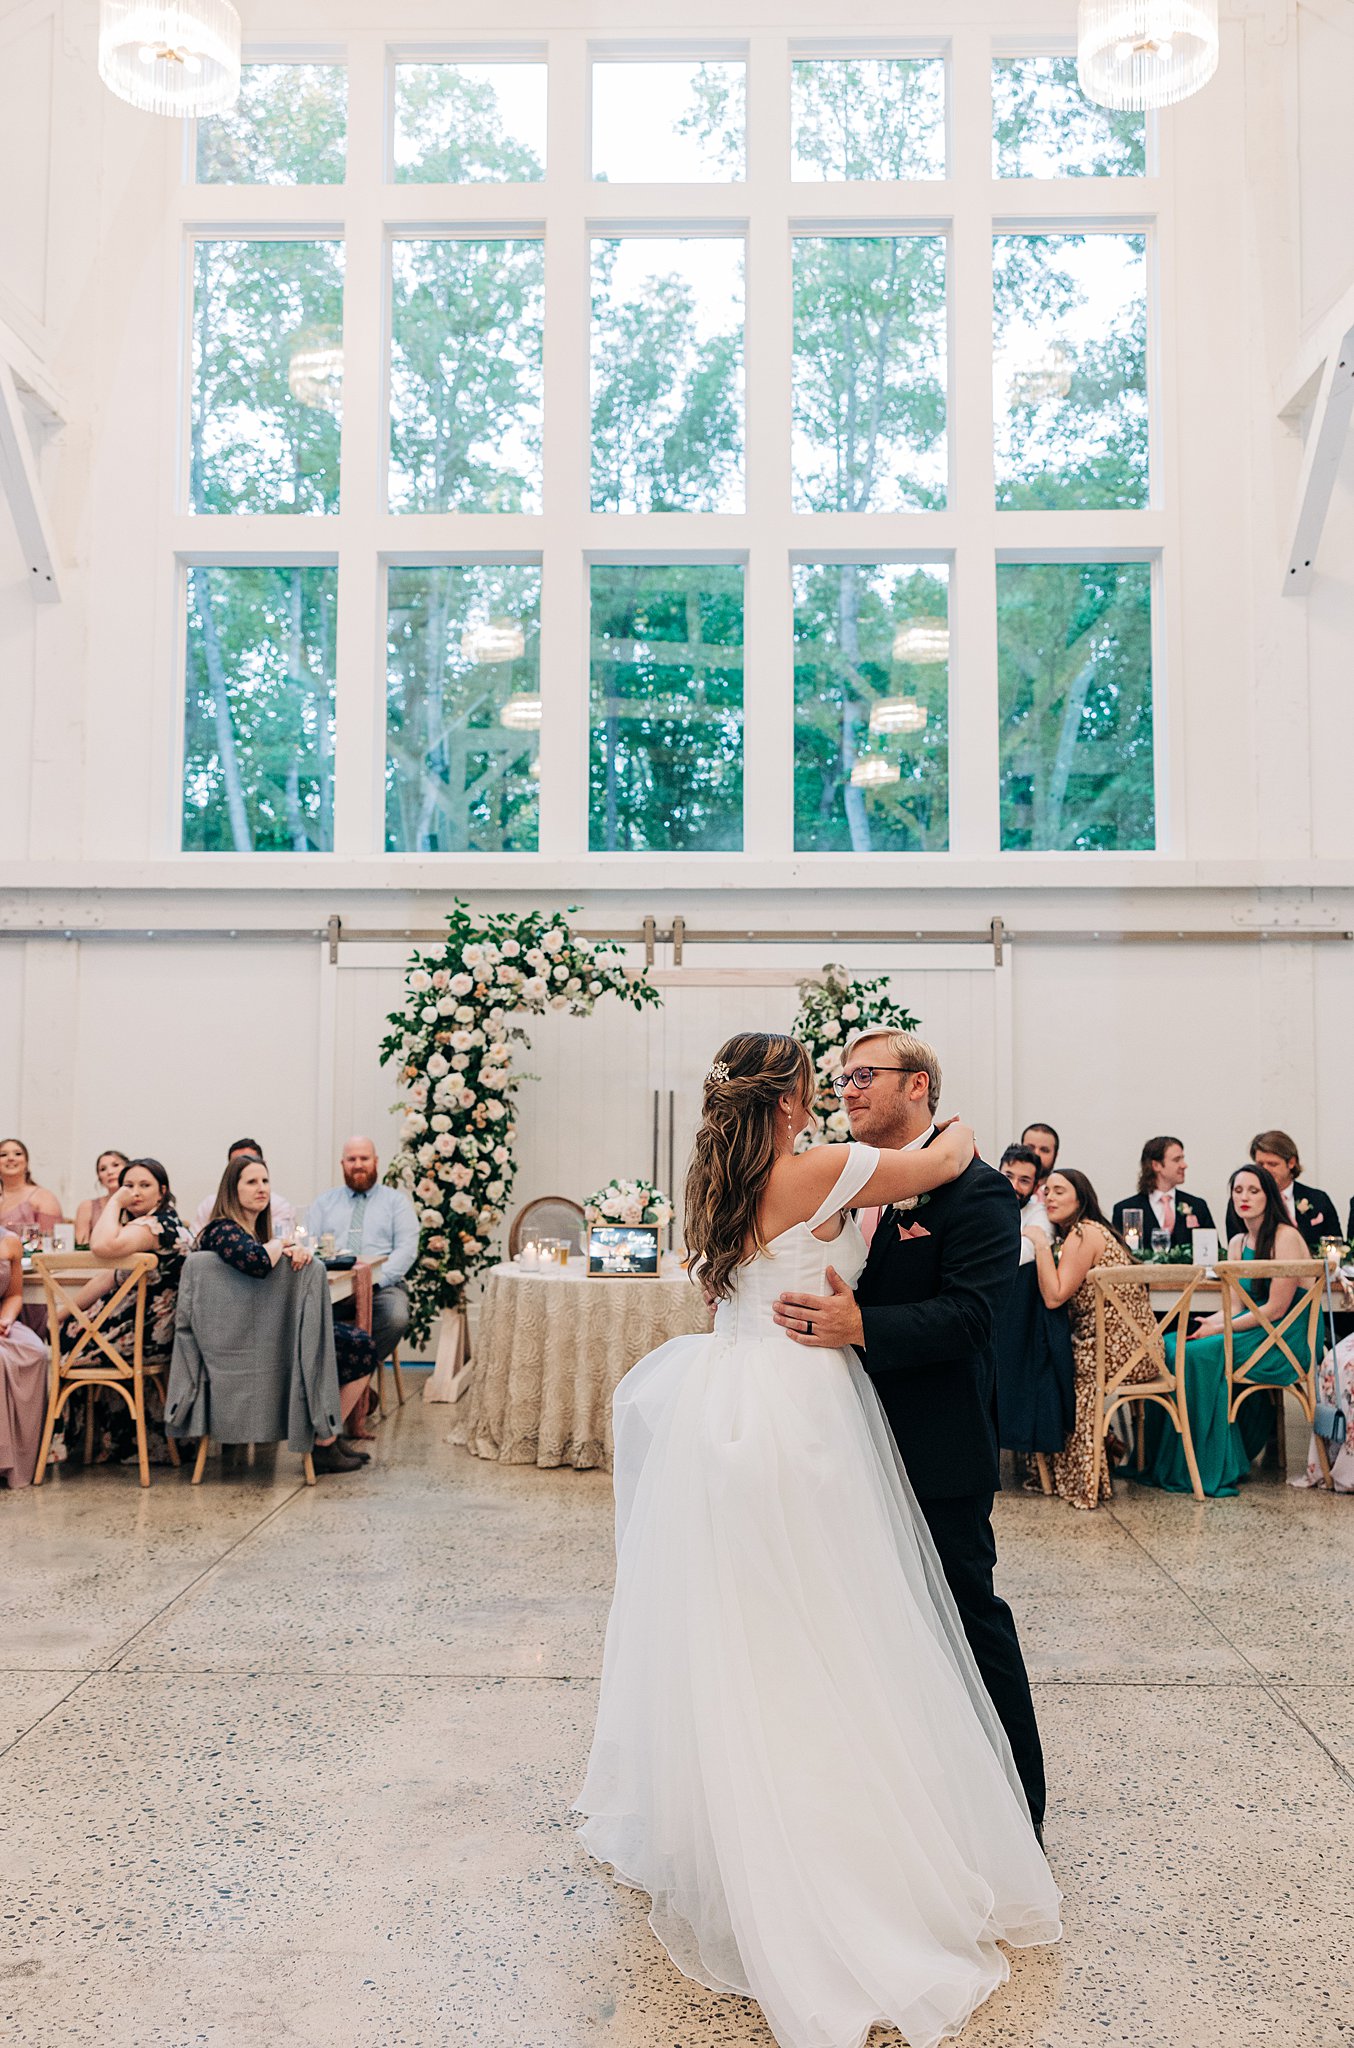 Newlyweds dance on the dance floor for the first time surrounded by guests at their carolina grove wedding venue